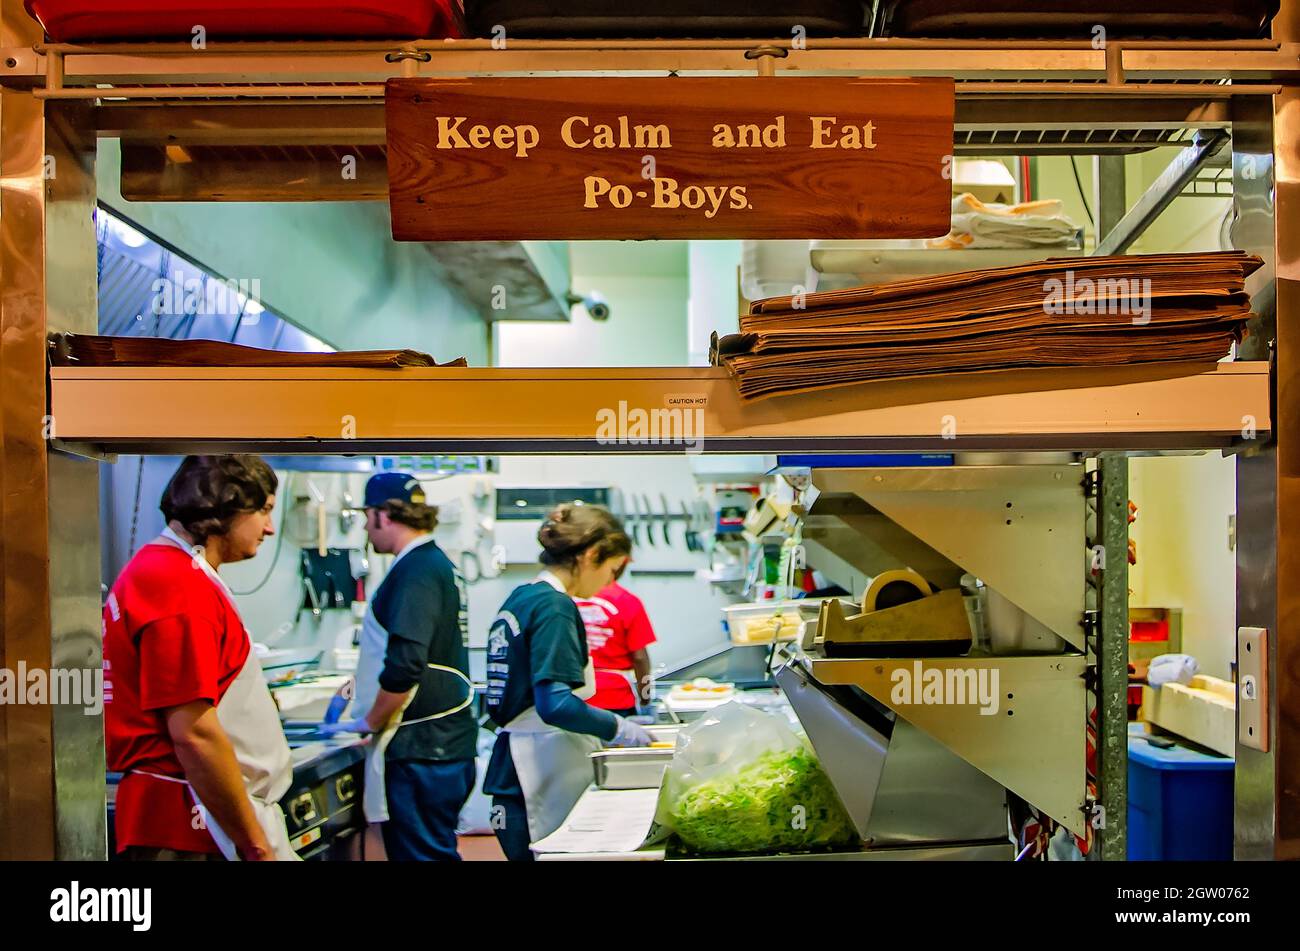 The pick-up window at Parkway Tavern & Bakery features a sign encouraging customers to “Keep calm and eat po-boys,” Nov. 12, 2015, in New Orleans, La. Stock Photo